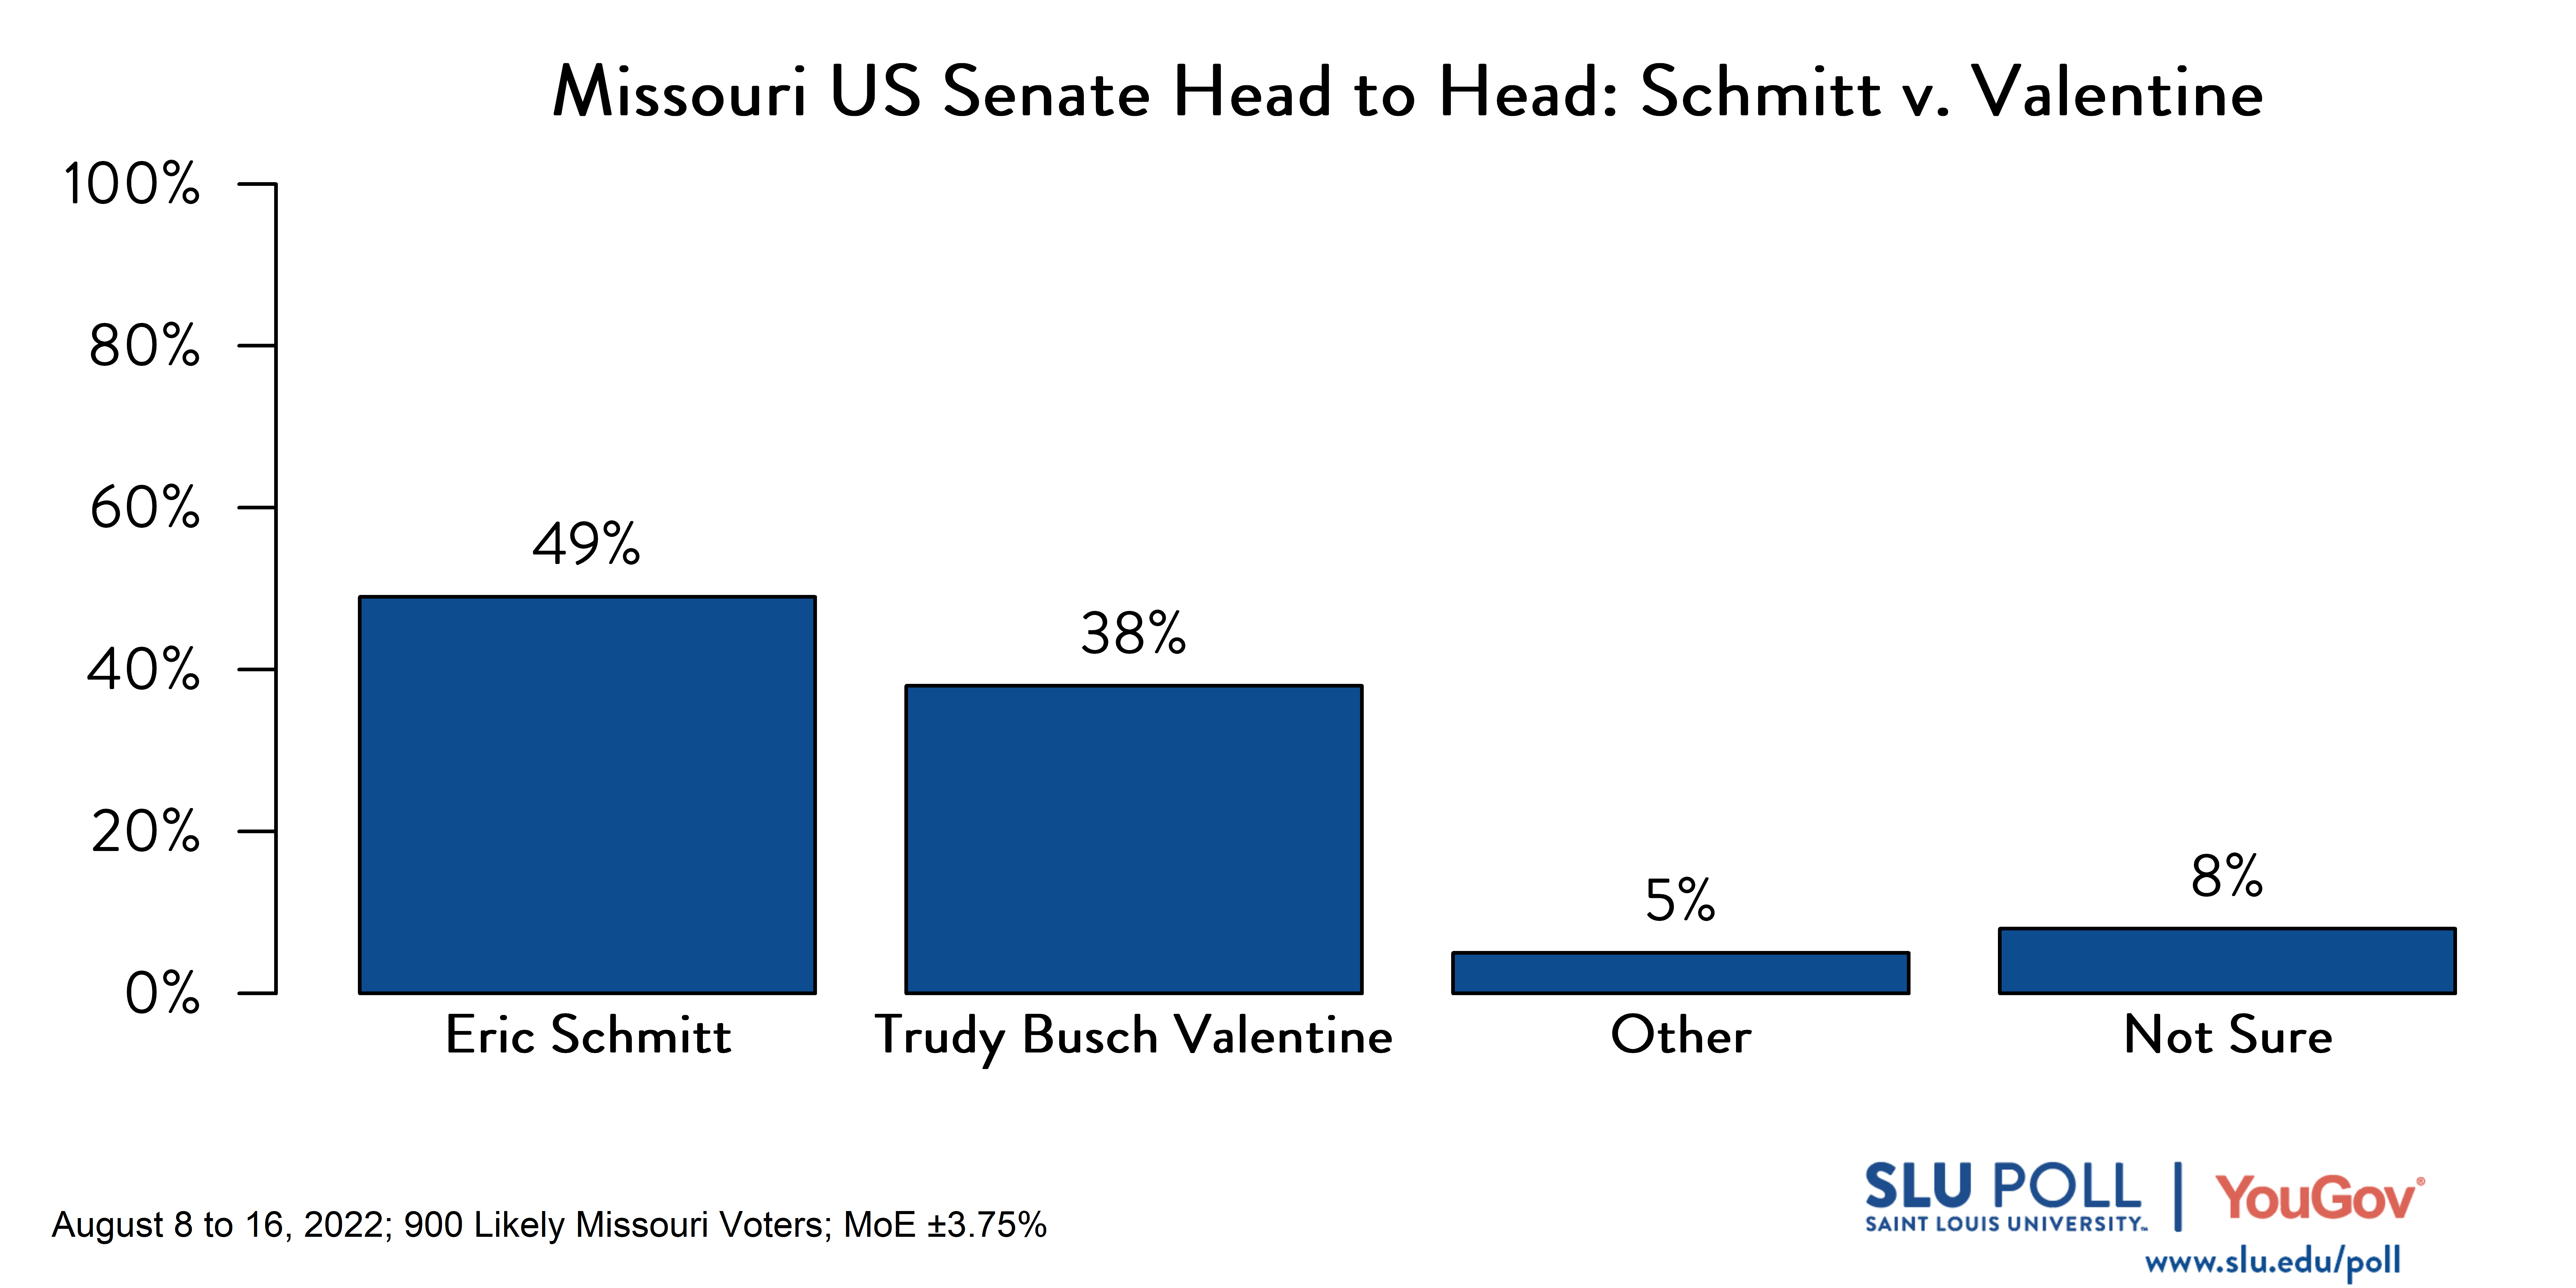 Likely voters' responses to 'If the election for U.S. Senator in Missouri were being held today, who would you vote for?': 49% Eric Schmitt (R), 38% Trudy Busch Valentine (D), 5% Other, and 8% Not sure.